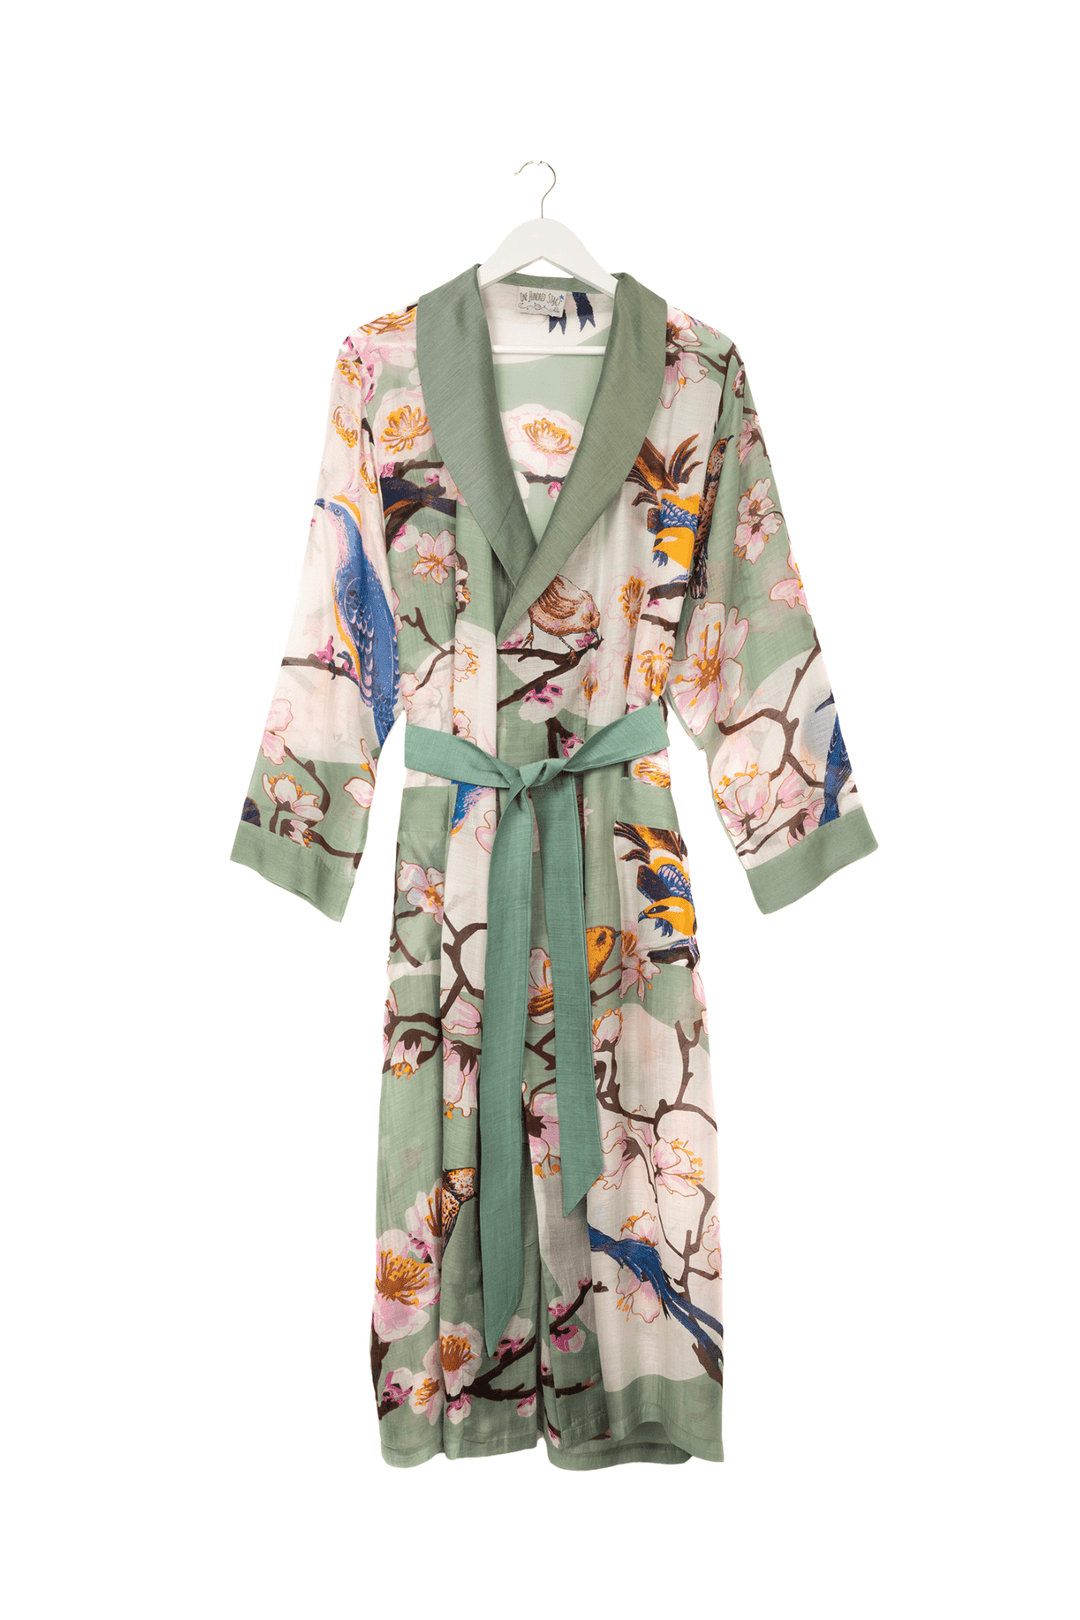 Blossom and Birds Aqua Gown - One Hundred Stars